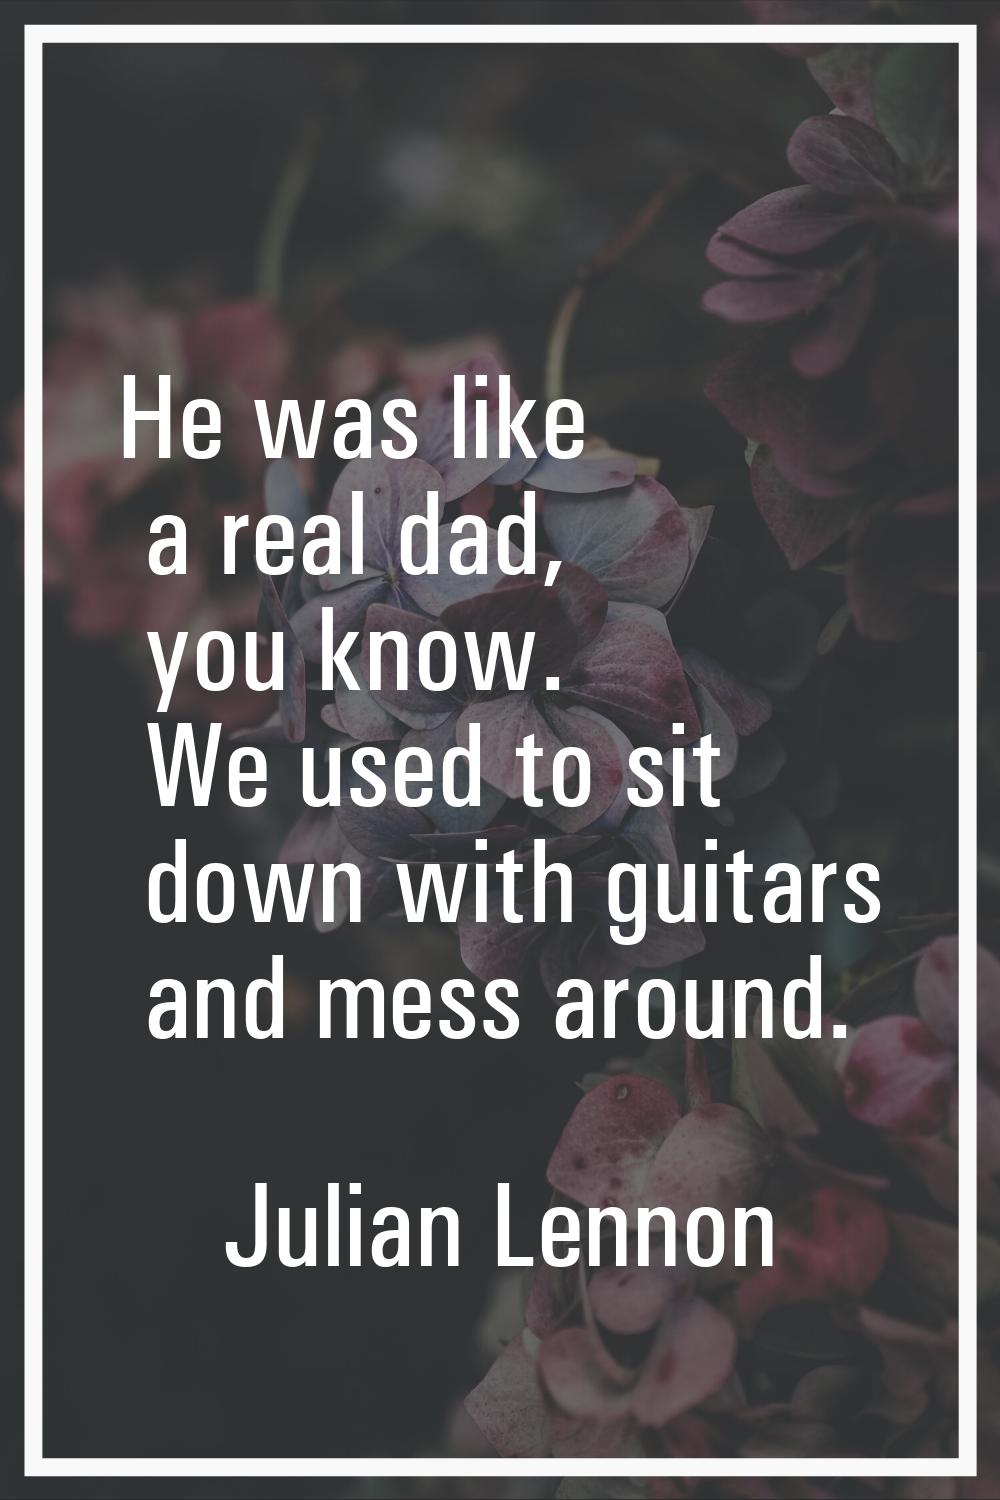 He was like a real dad, you know. We used to sit down with guitars and mess around.